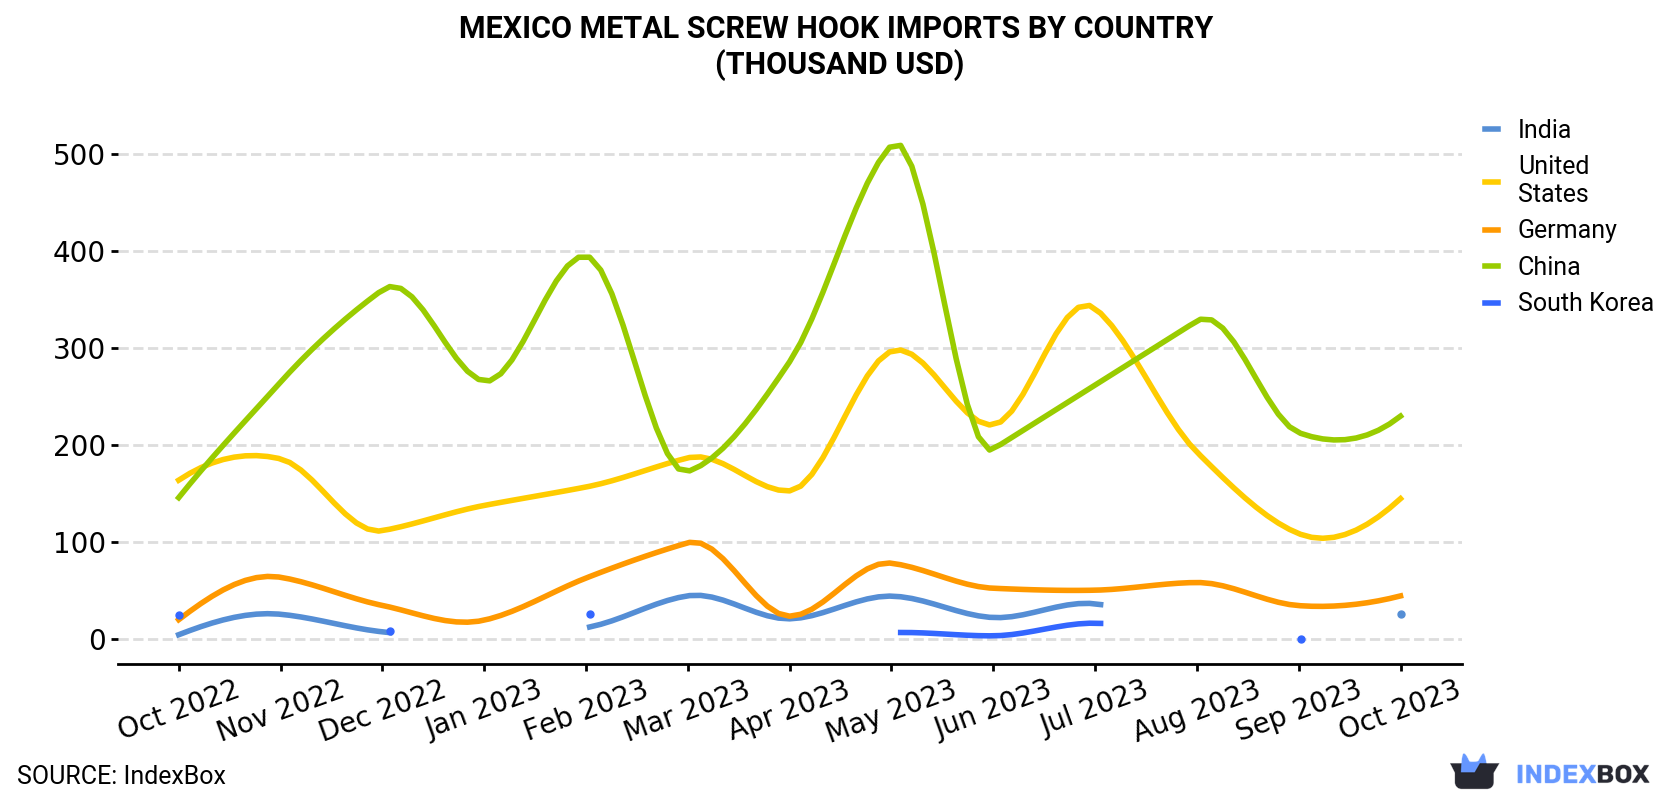 Mexico Metal Screw Hook Imports By Country (Thousand USD)